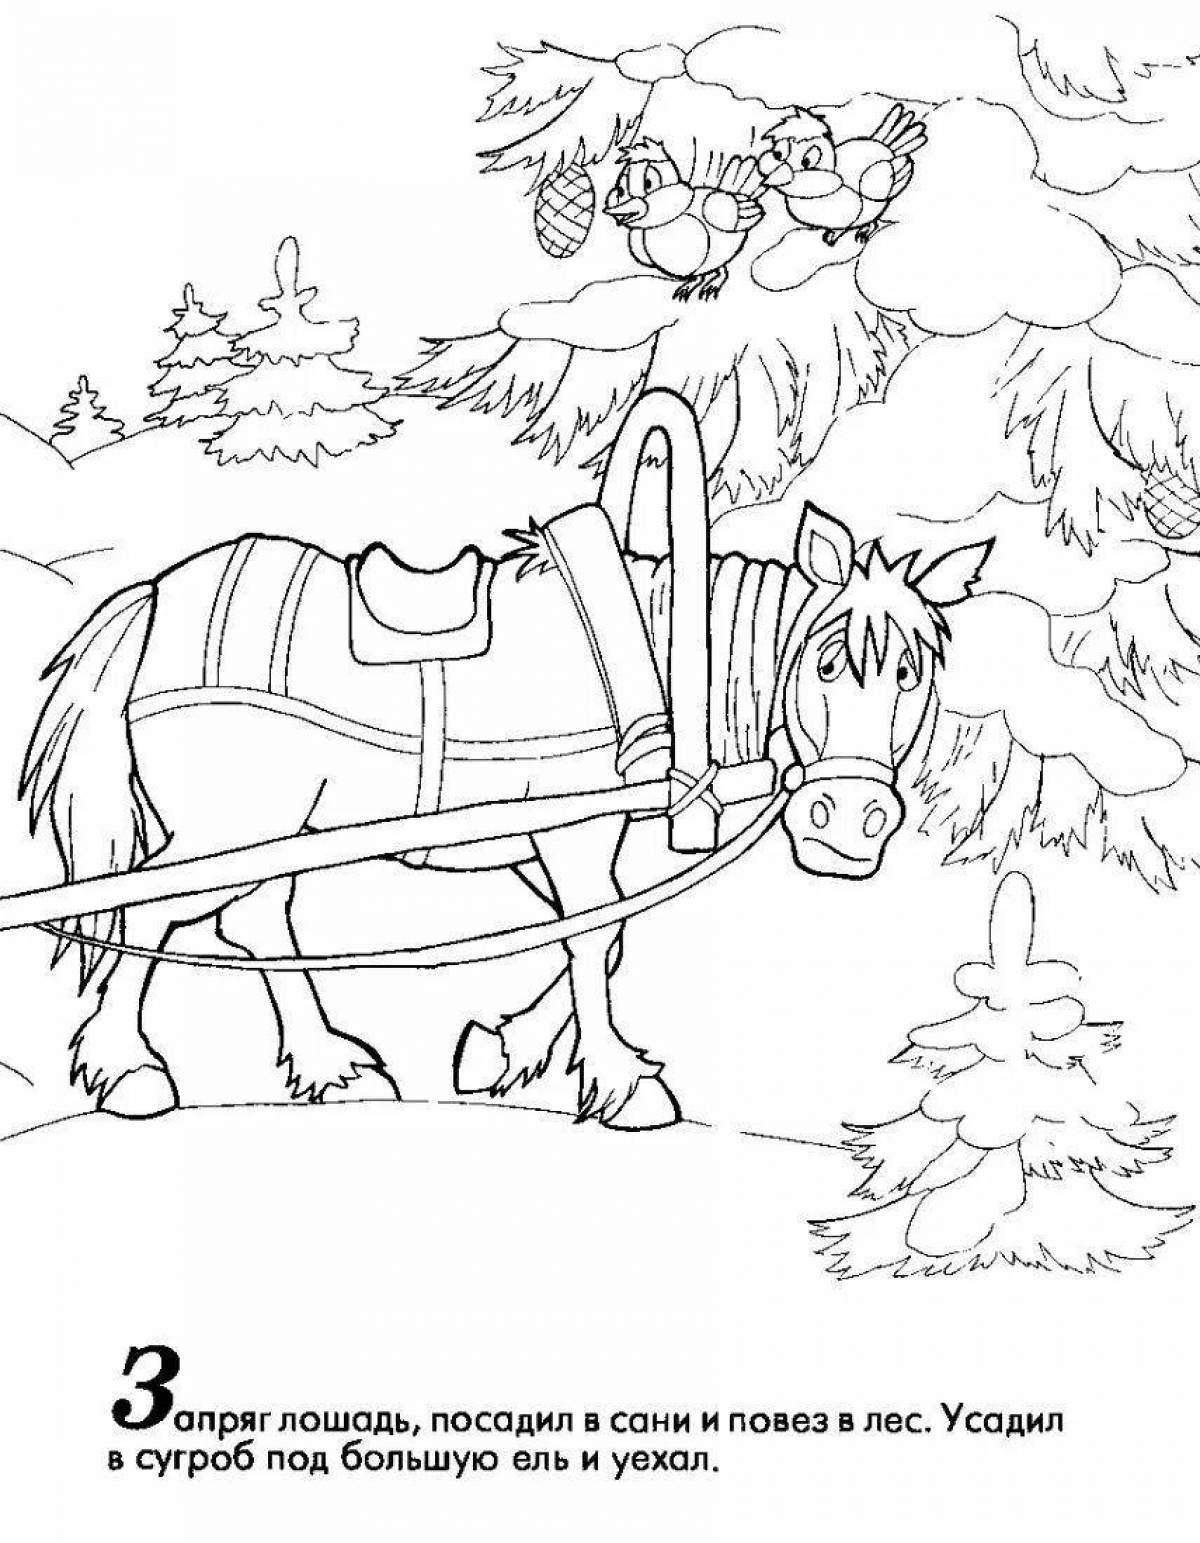 Glowing coloring book based on Morozko's fairy tale